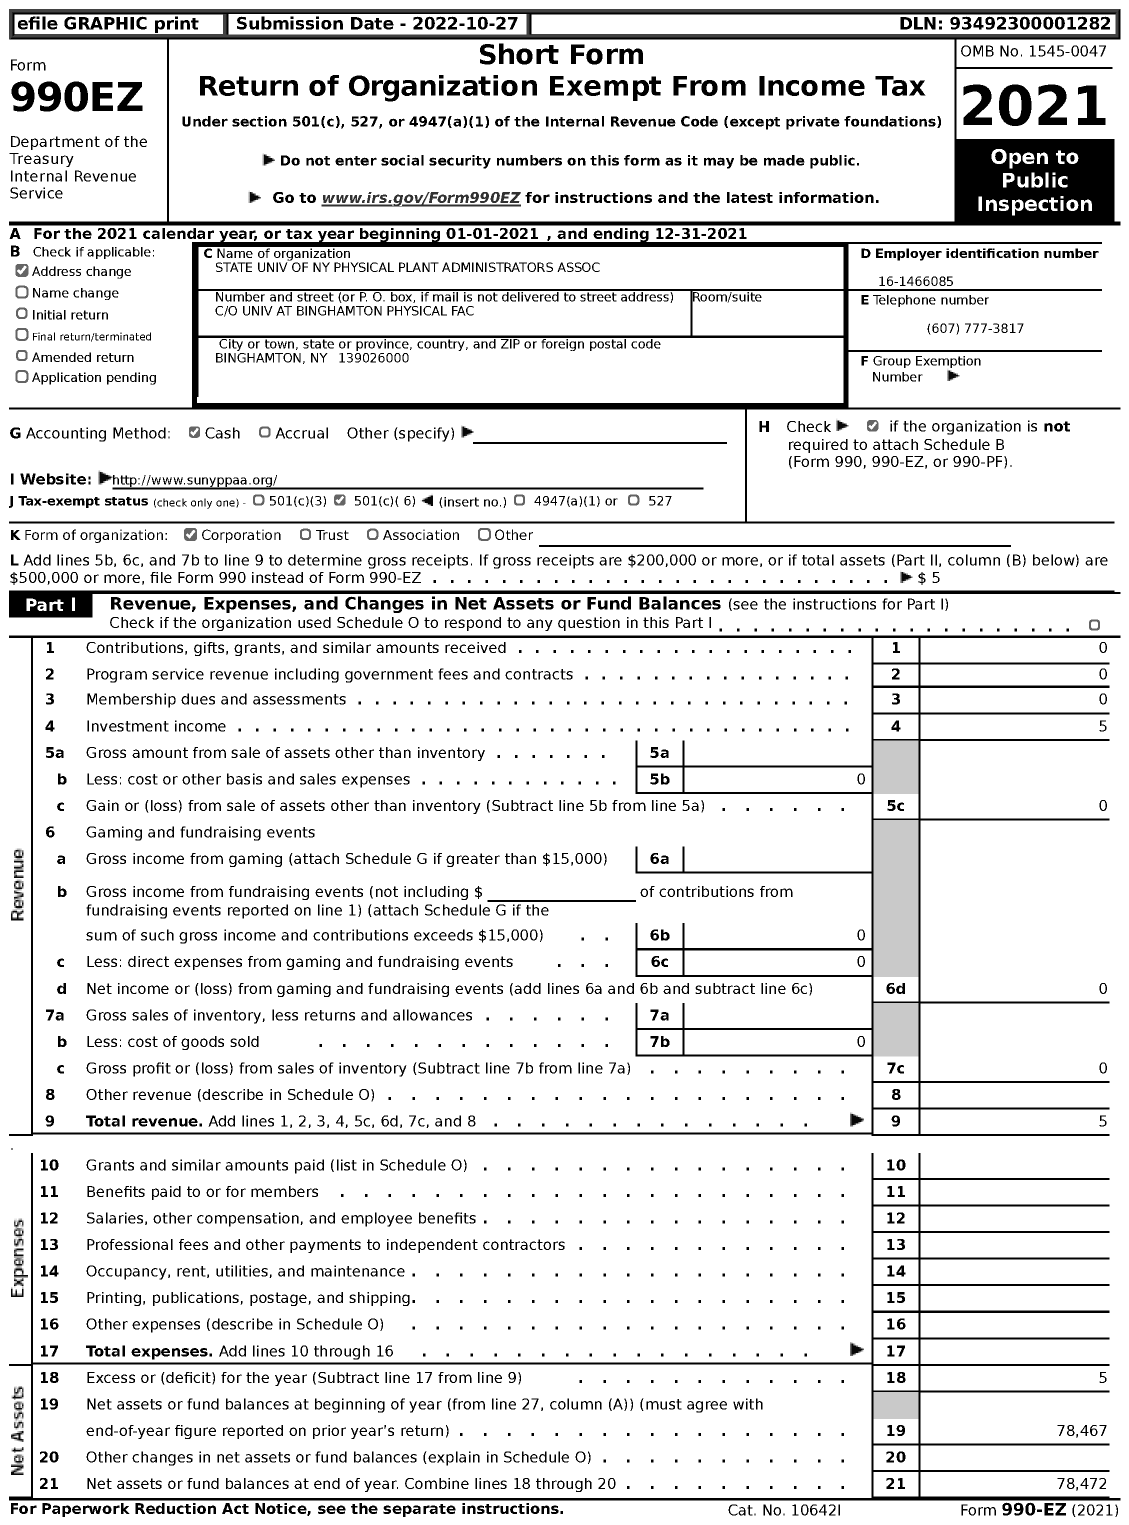 Image of first page of 2021 Form 990EZ for State Univ of Ny Physical Plant Administrators Association